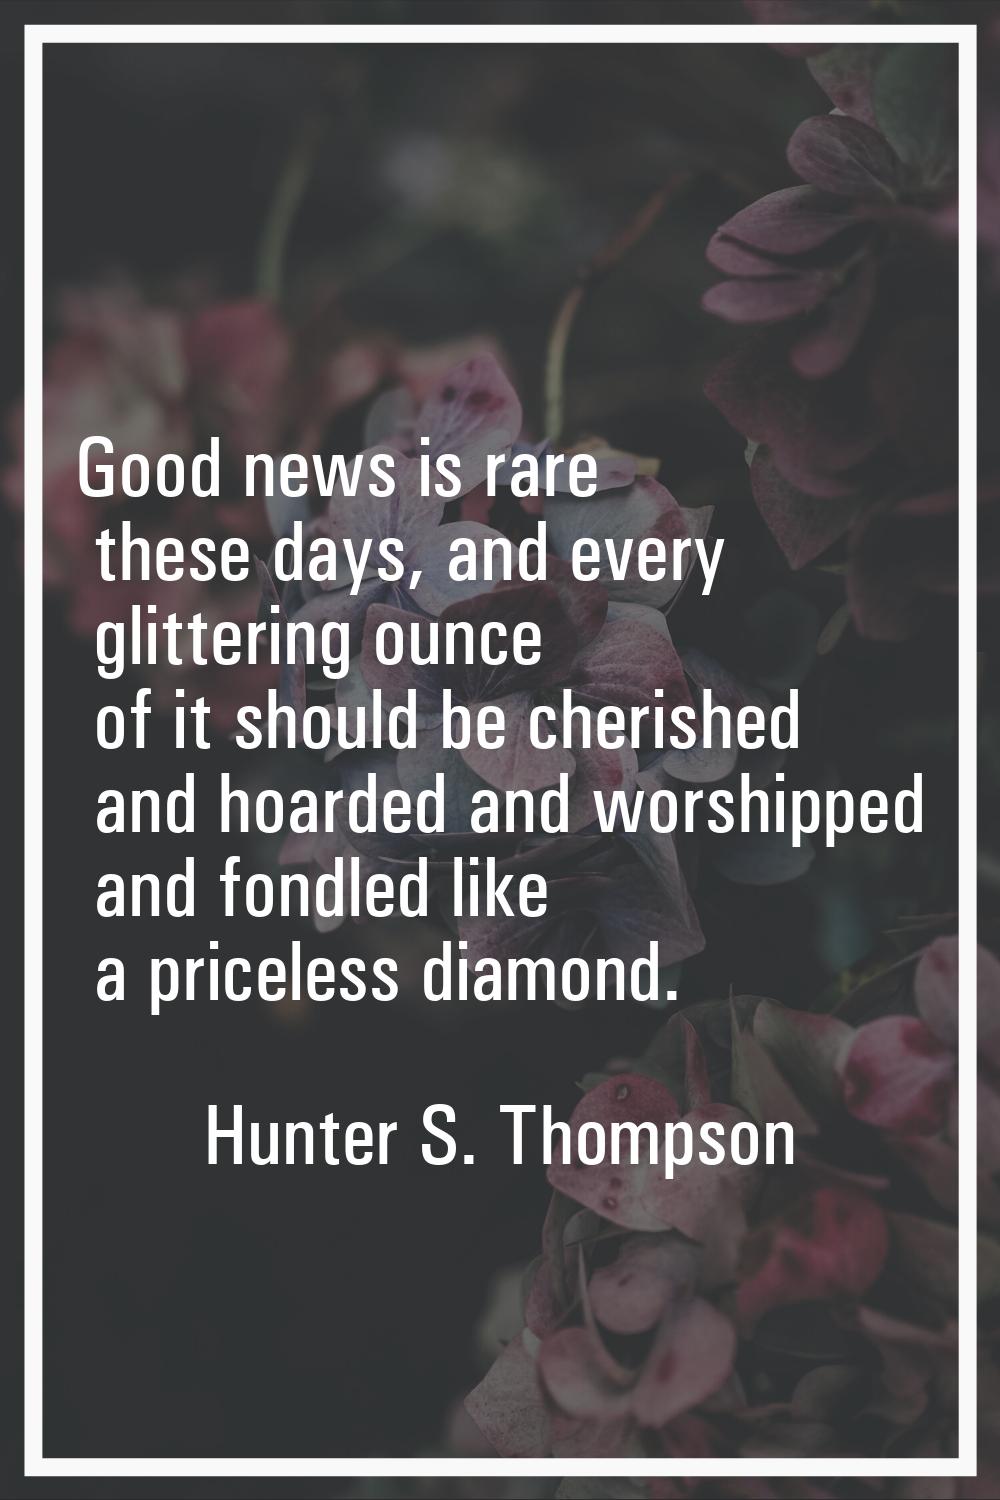 Good news is rare these days, and every glittering ounce of it should be cherished and hoarded and 